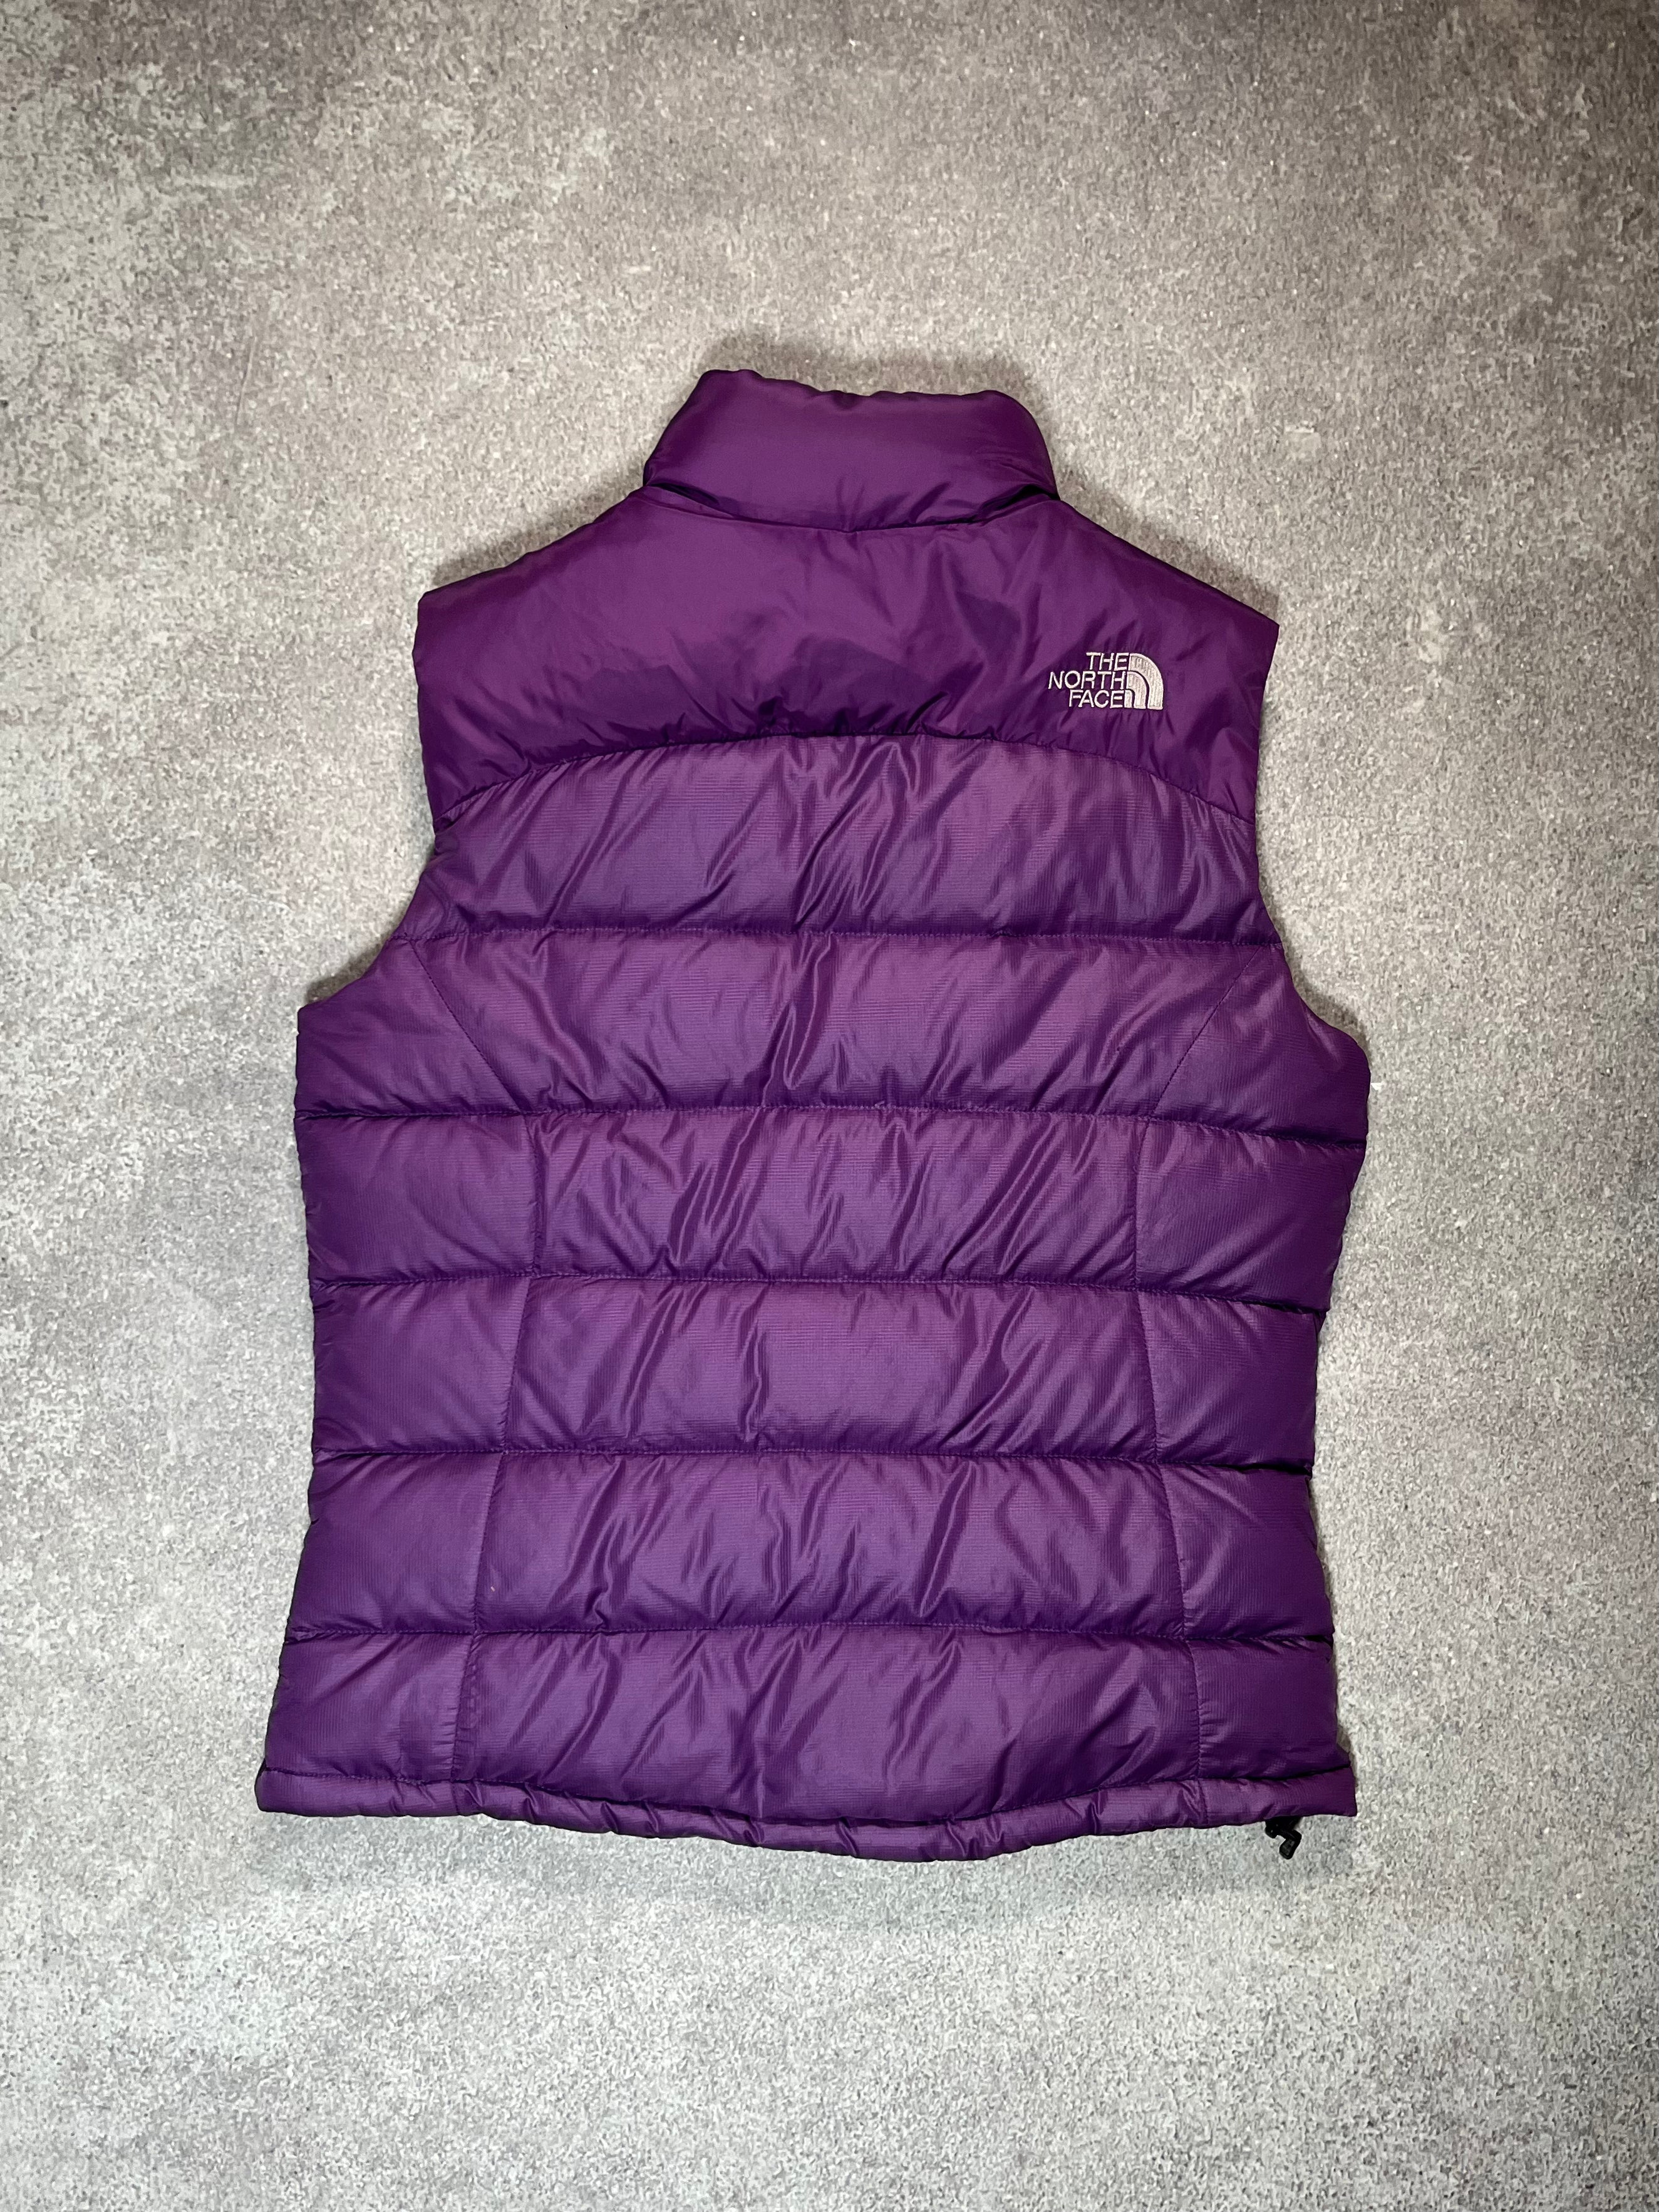 The North Face 700 Puffer Vest Purple // Small - RHAGHOUSE VINTAGE